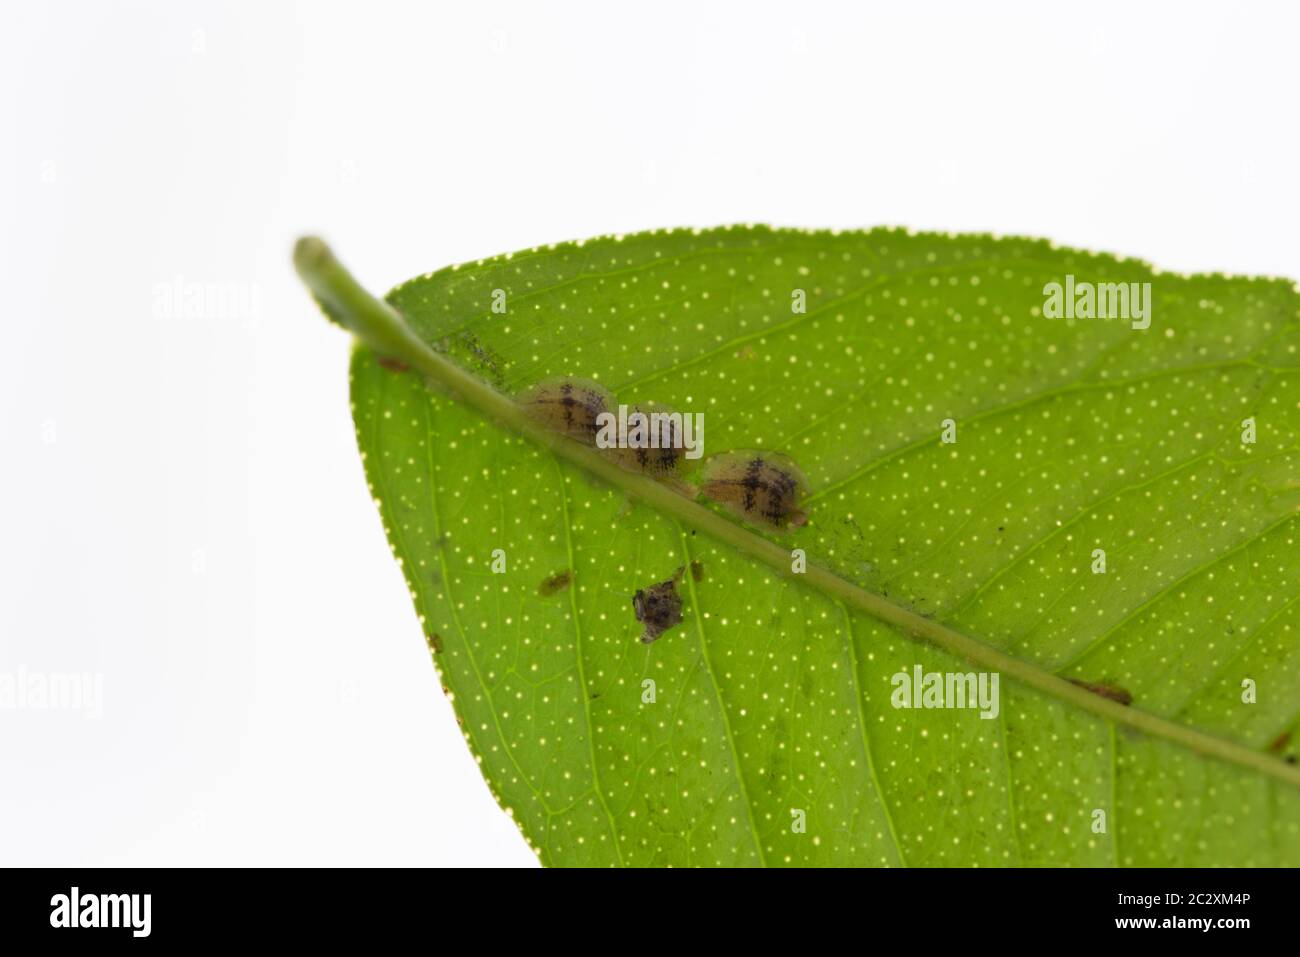 Three scale insects on a green leaf Stock Photo